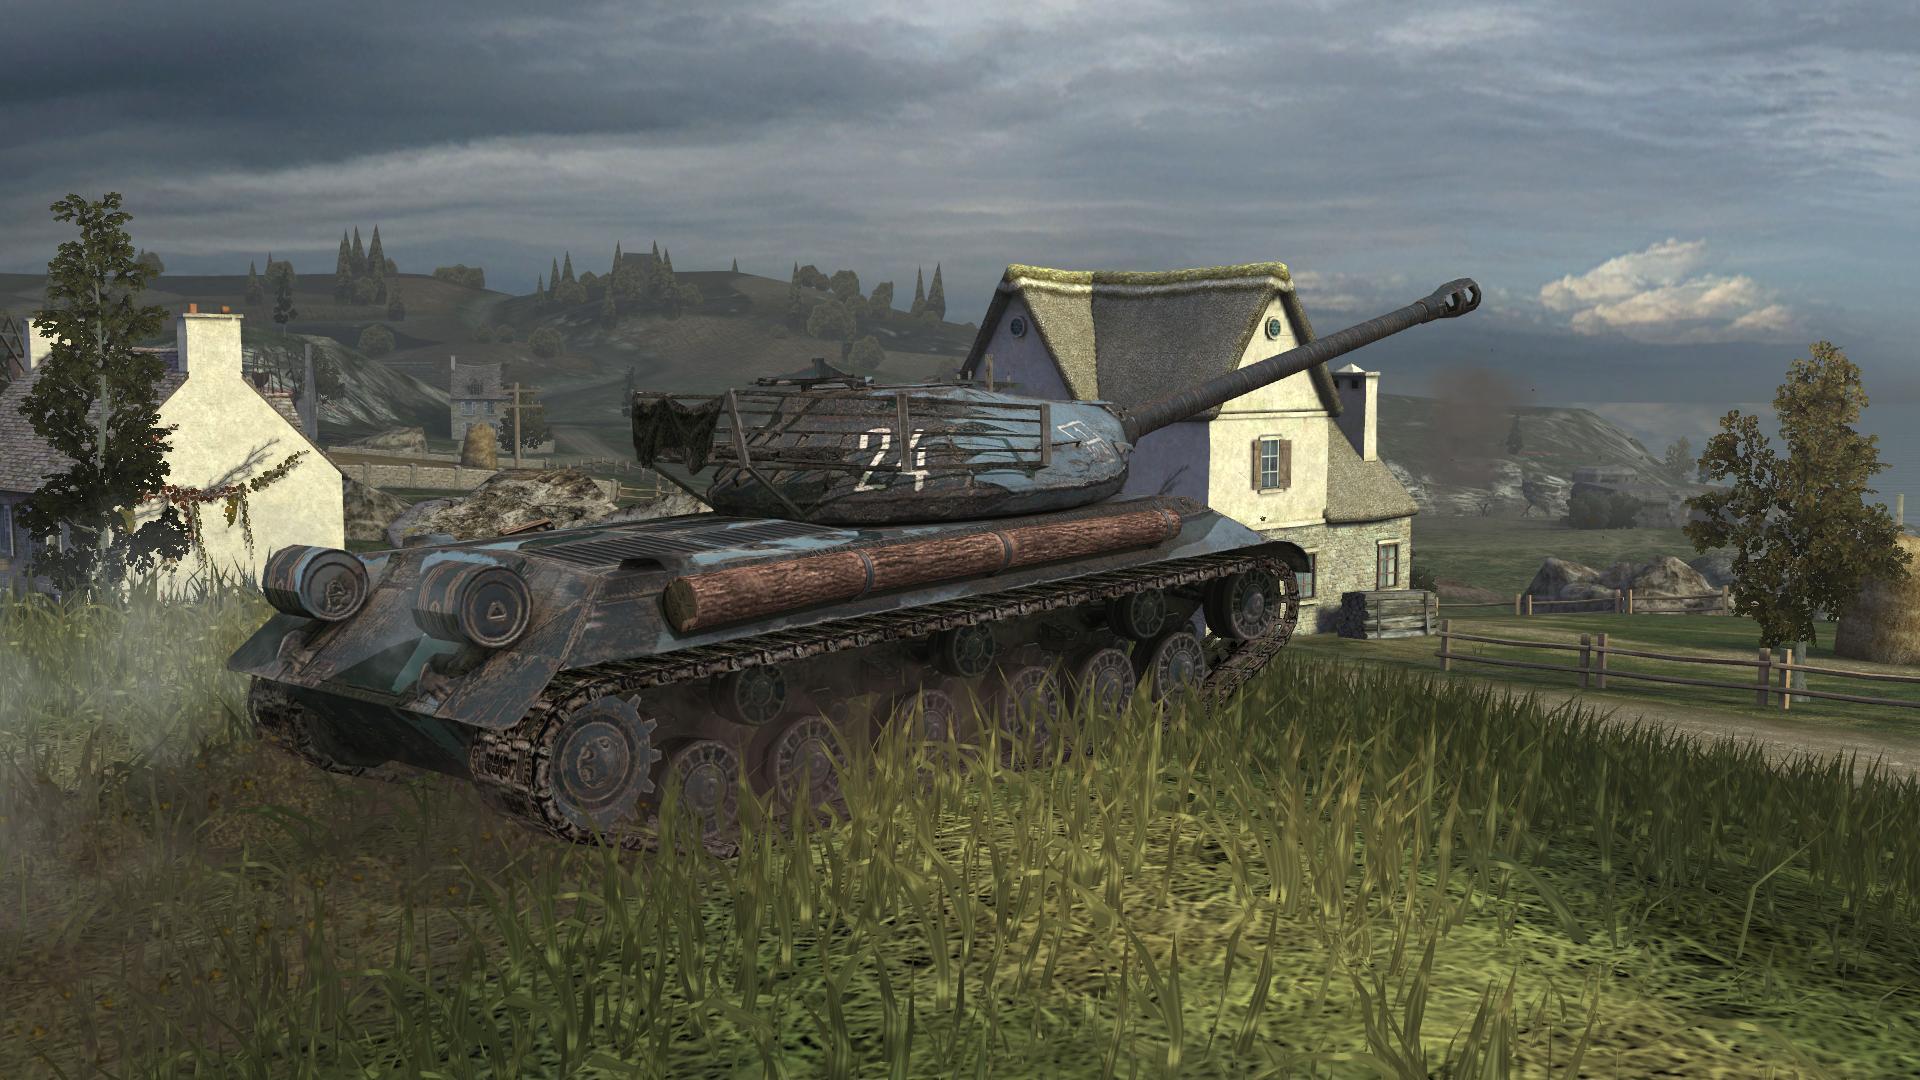 Feb 21 19 Update 5 8 World Of Tanks Blitz Tog Ii Just Two Words Mad Games From March 15 The Mad Modifications Will Be Back For A Week But This Time They Will Be Available On A Greater Number Of Maps Which Means Battles In This Mode Will